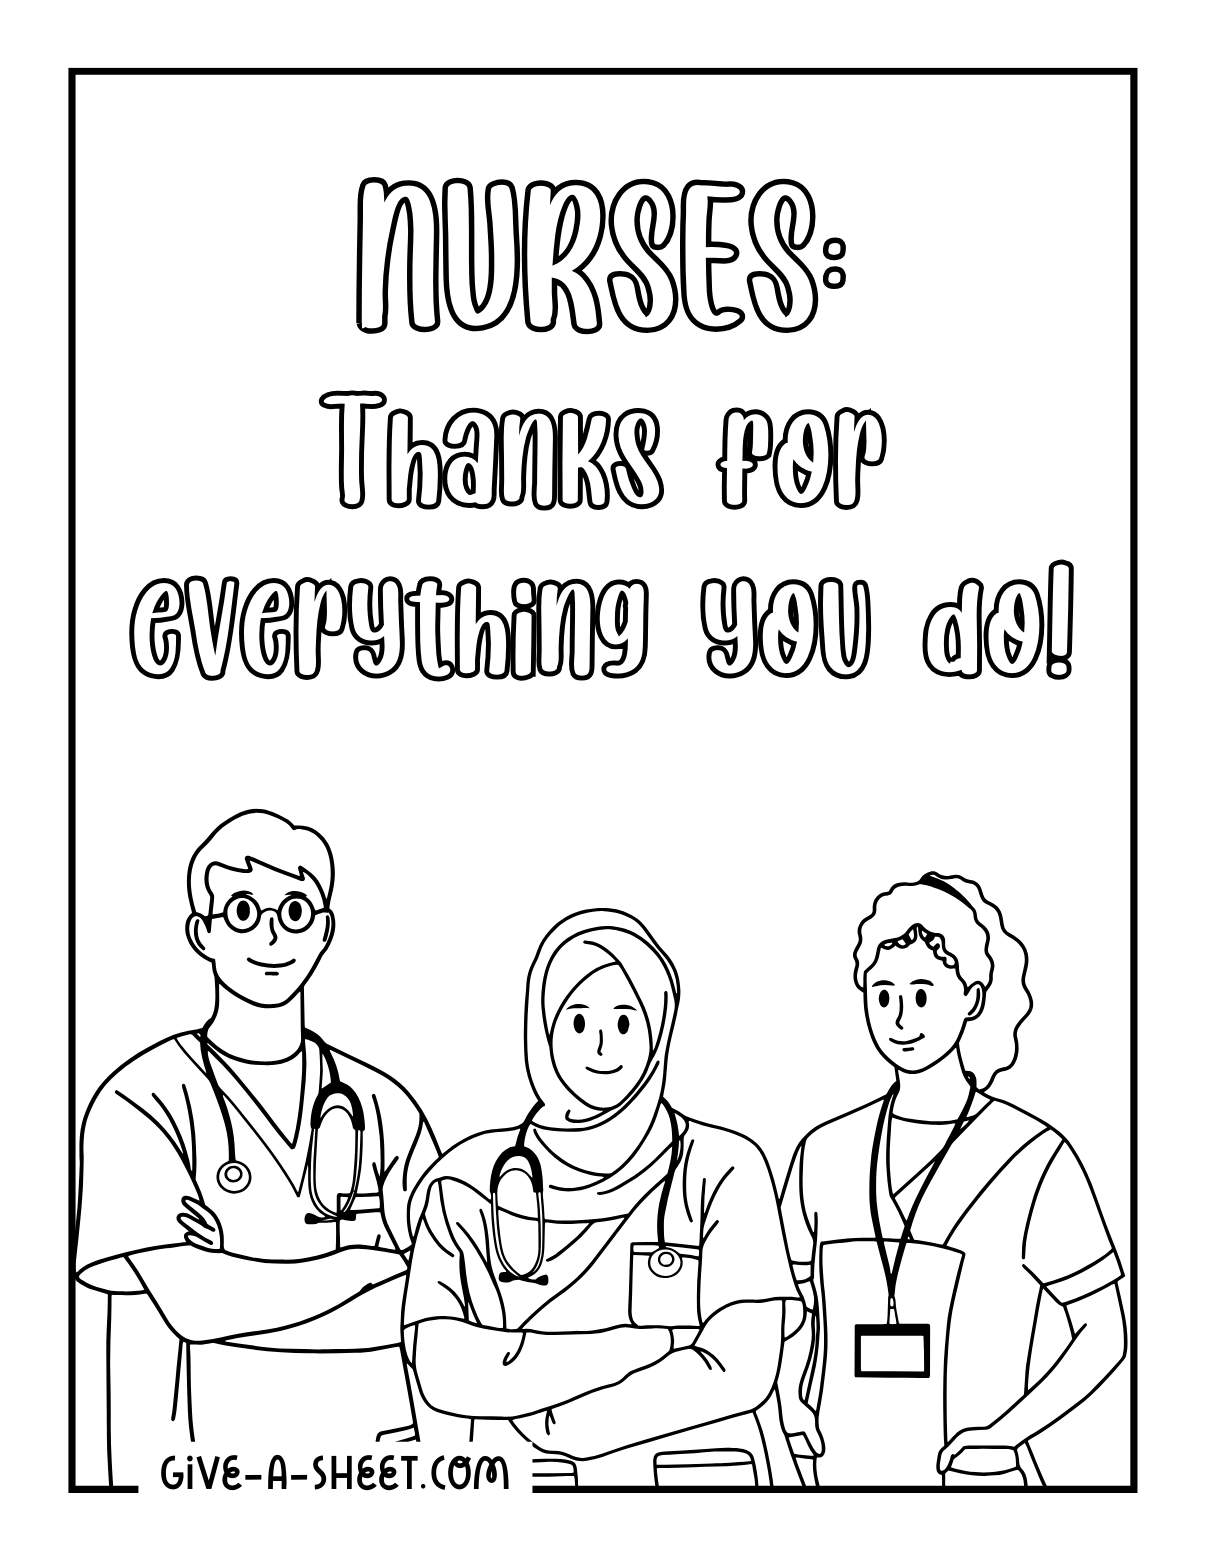 Diversity of National nurses day coloring page.